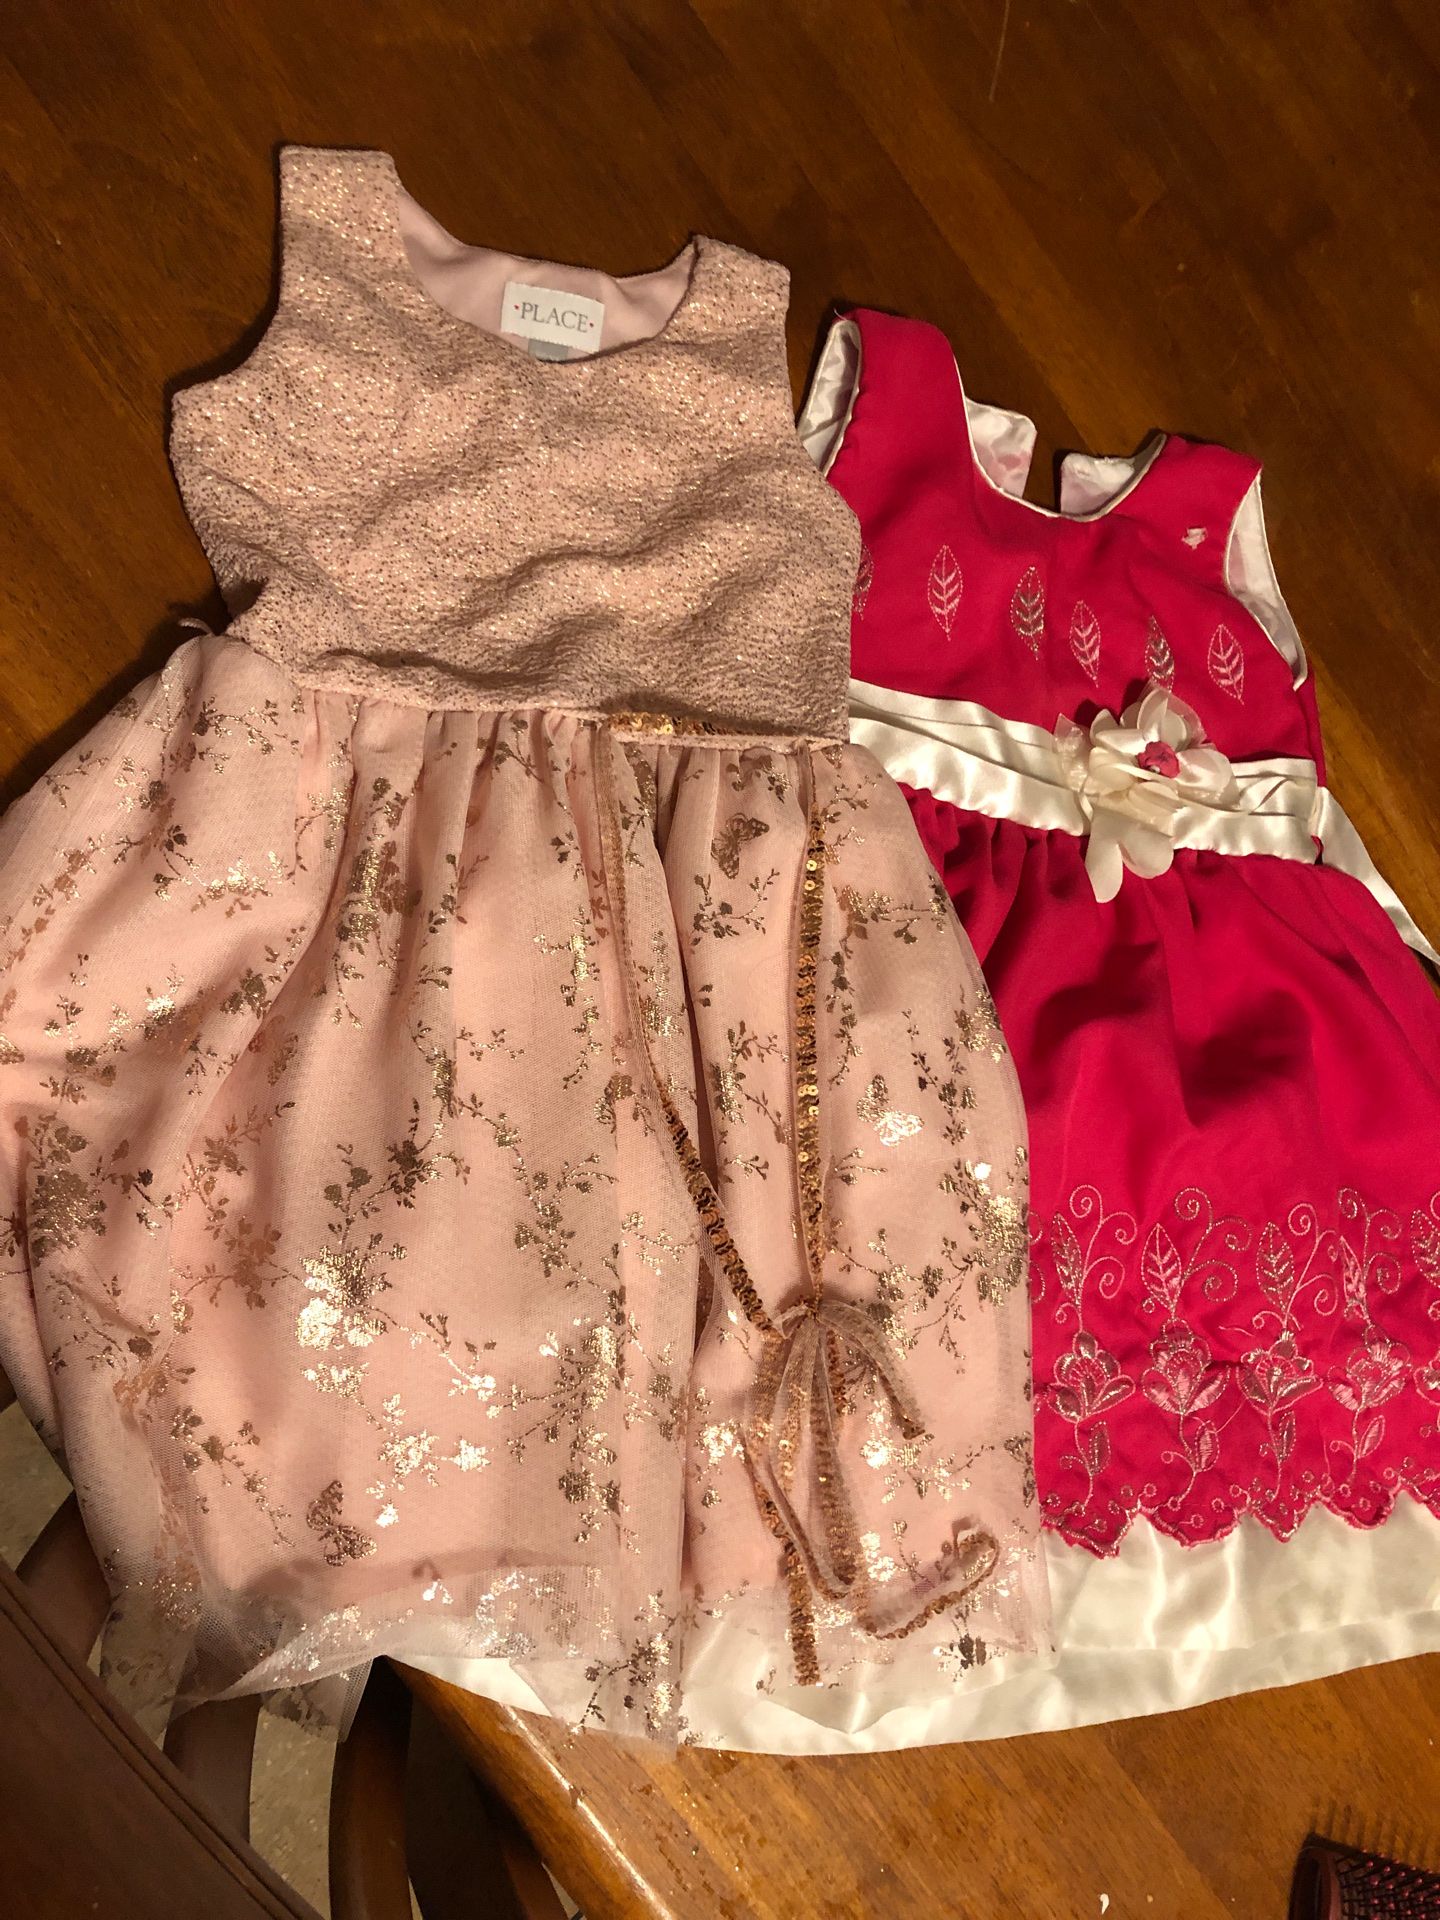 NOT FREE. Girls dresses take both for $5.00 firm